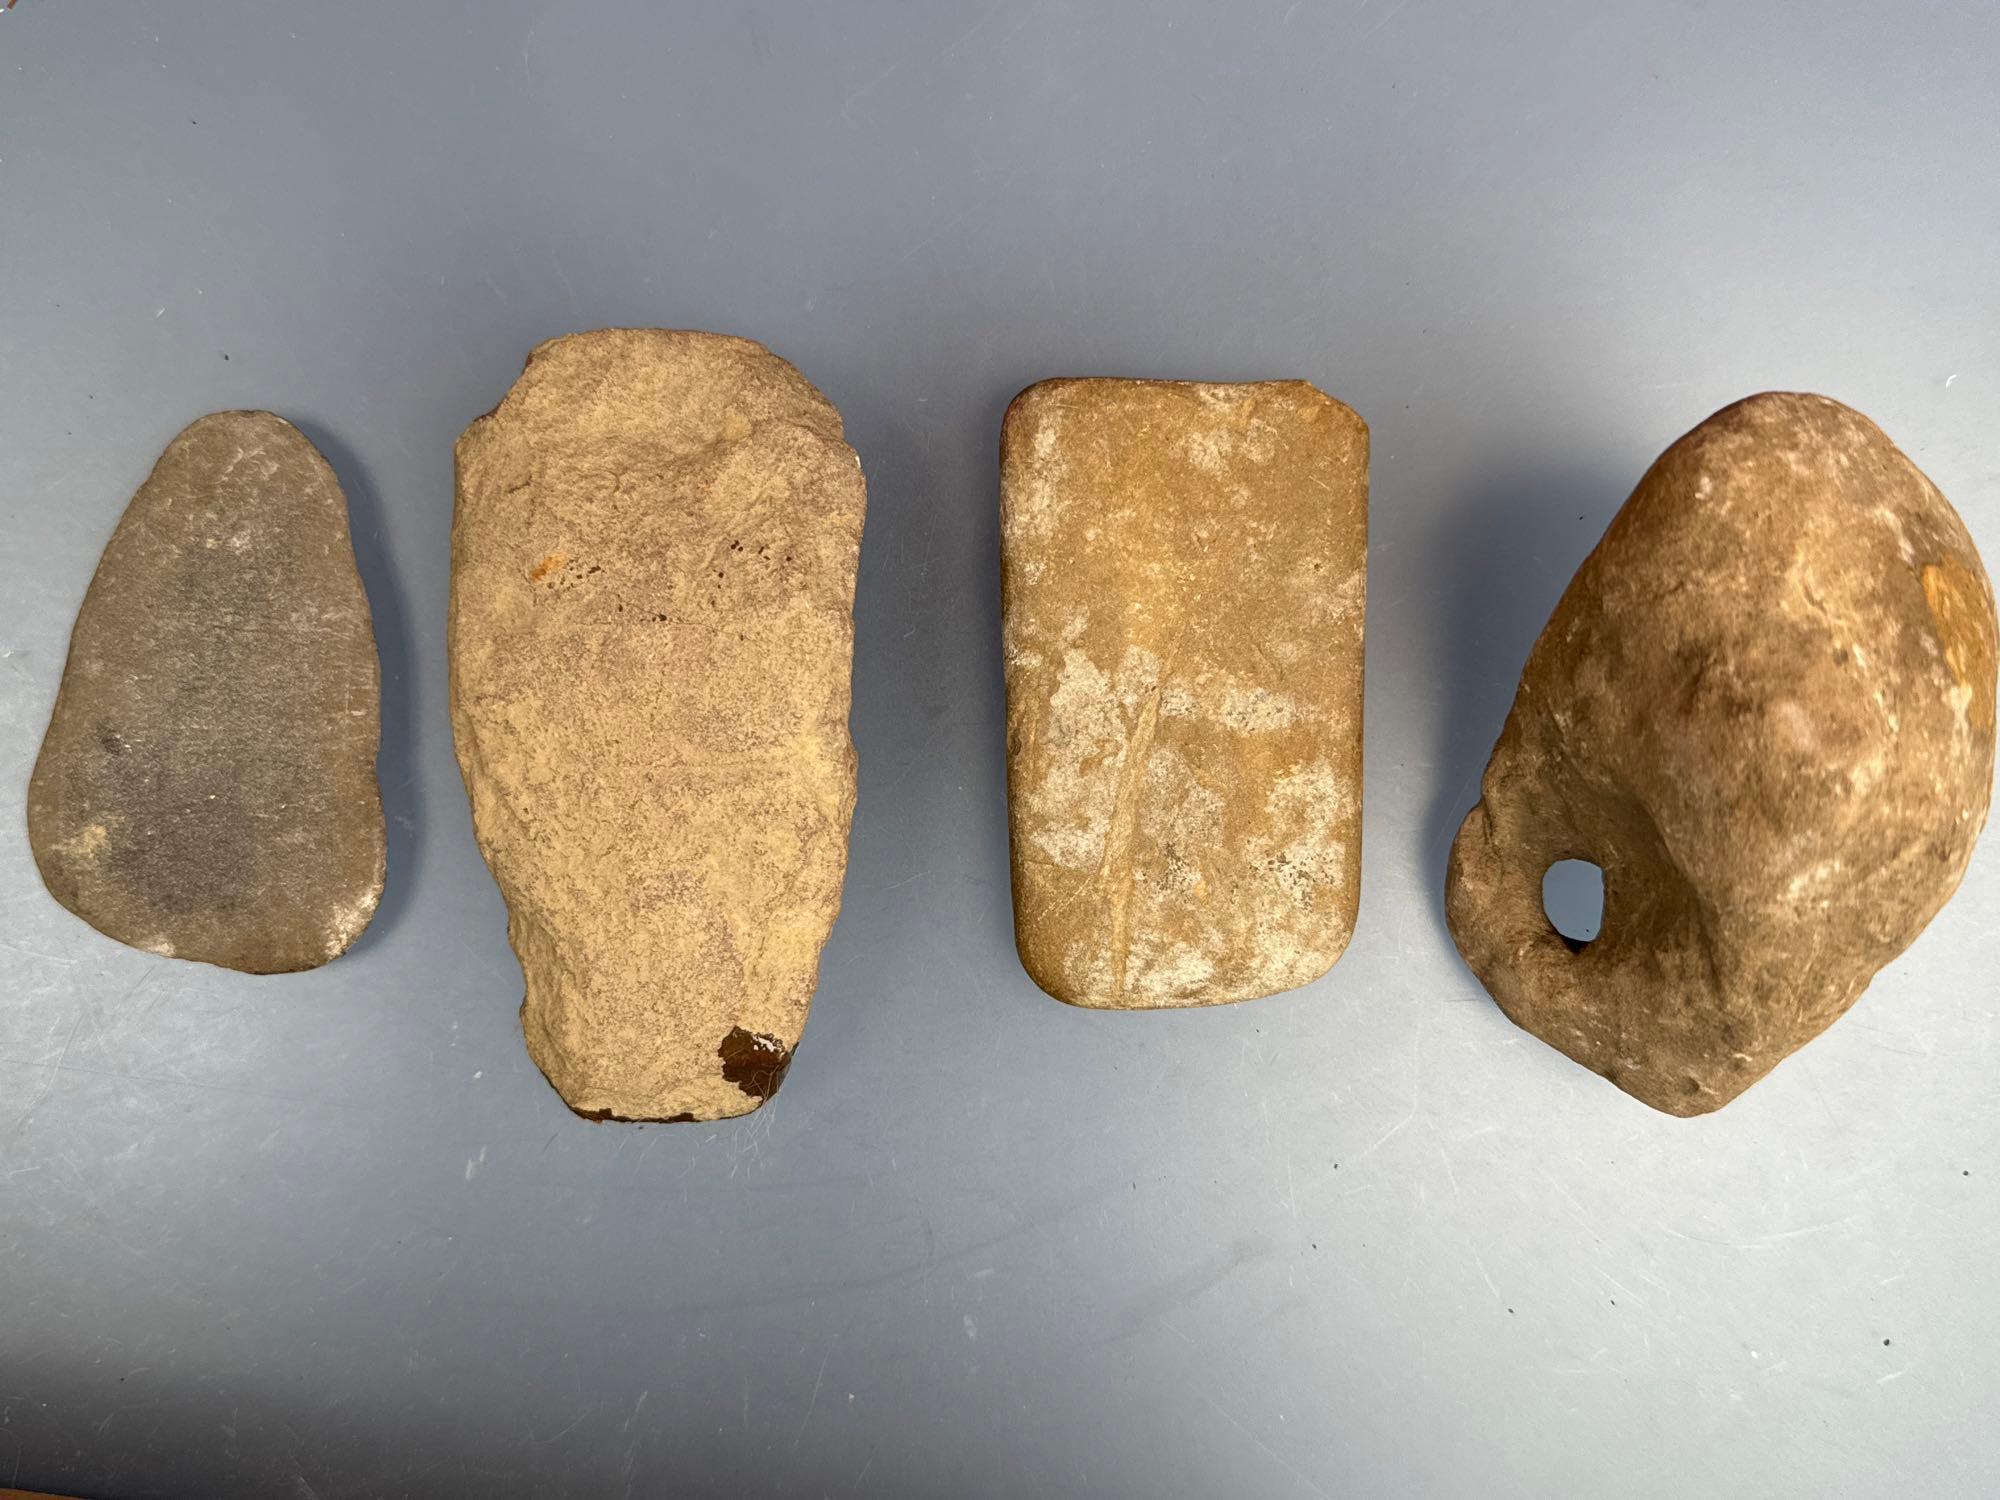 Lot of Various Stone Tools, Soapstone, Some Geofacts, Longest is 13", Found in New York, Ex: Dave Su